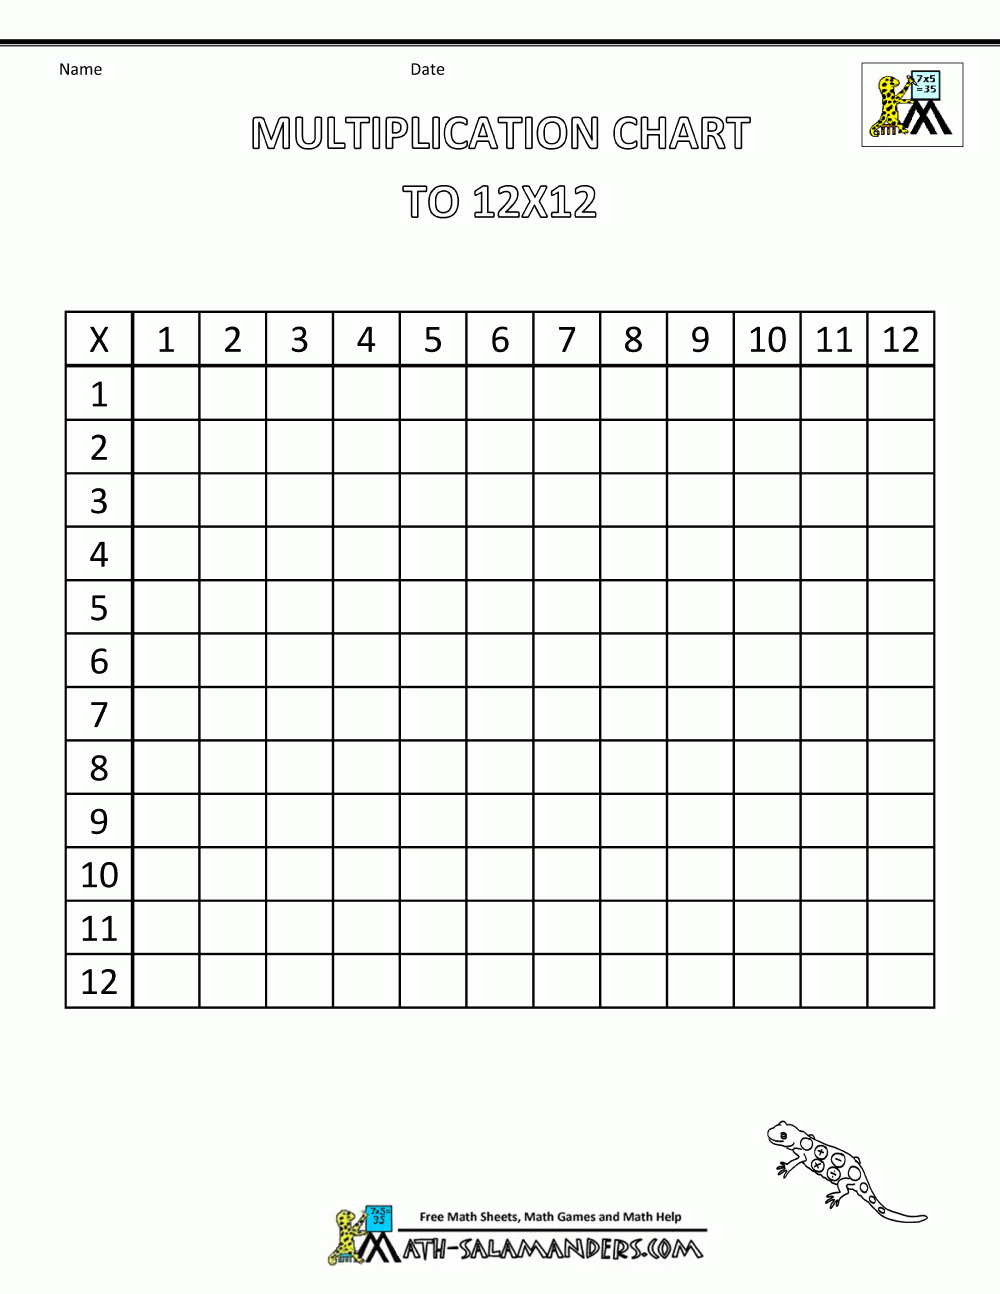 Multiplication Times Table Chart To 12X12 Blank regarding Printable Multiplication Table Blank